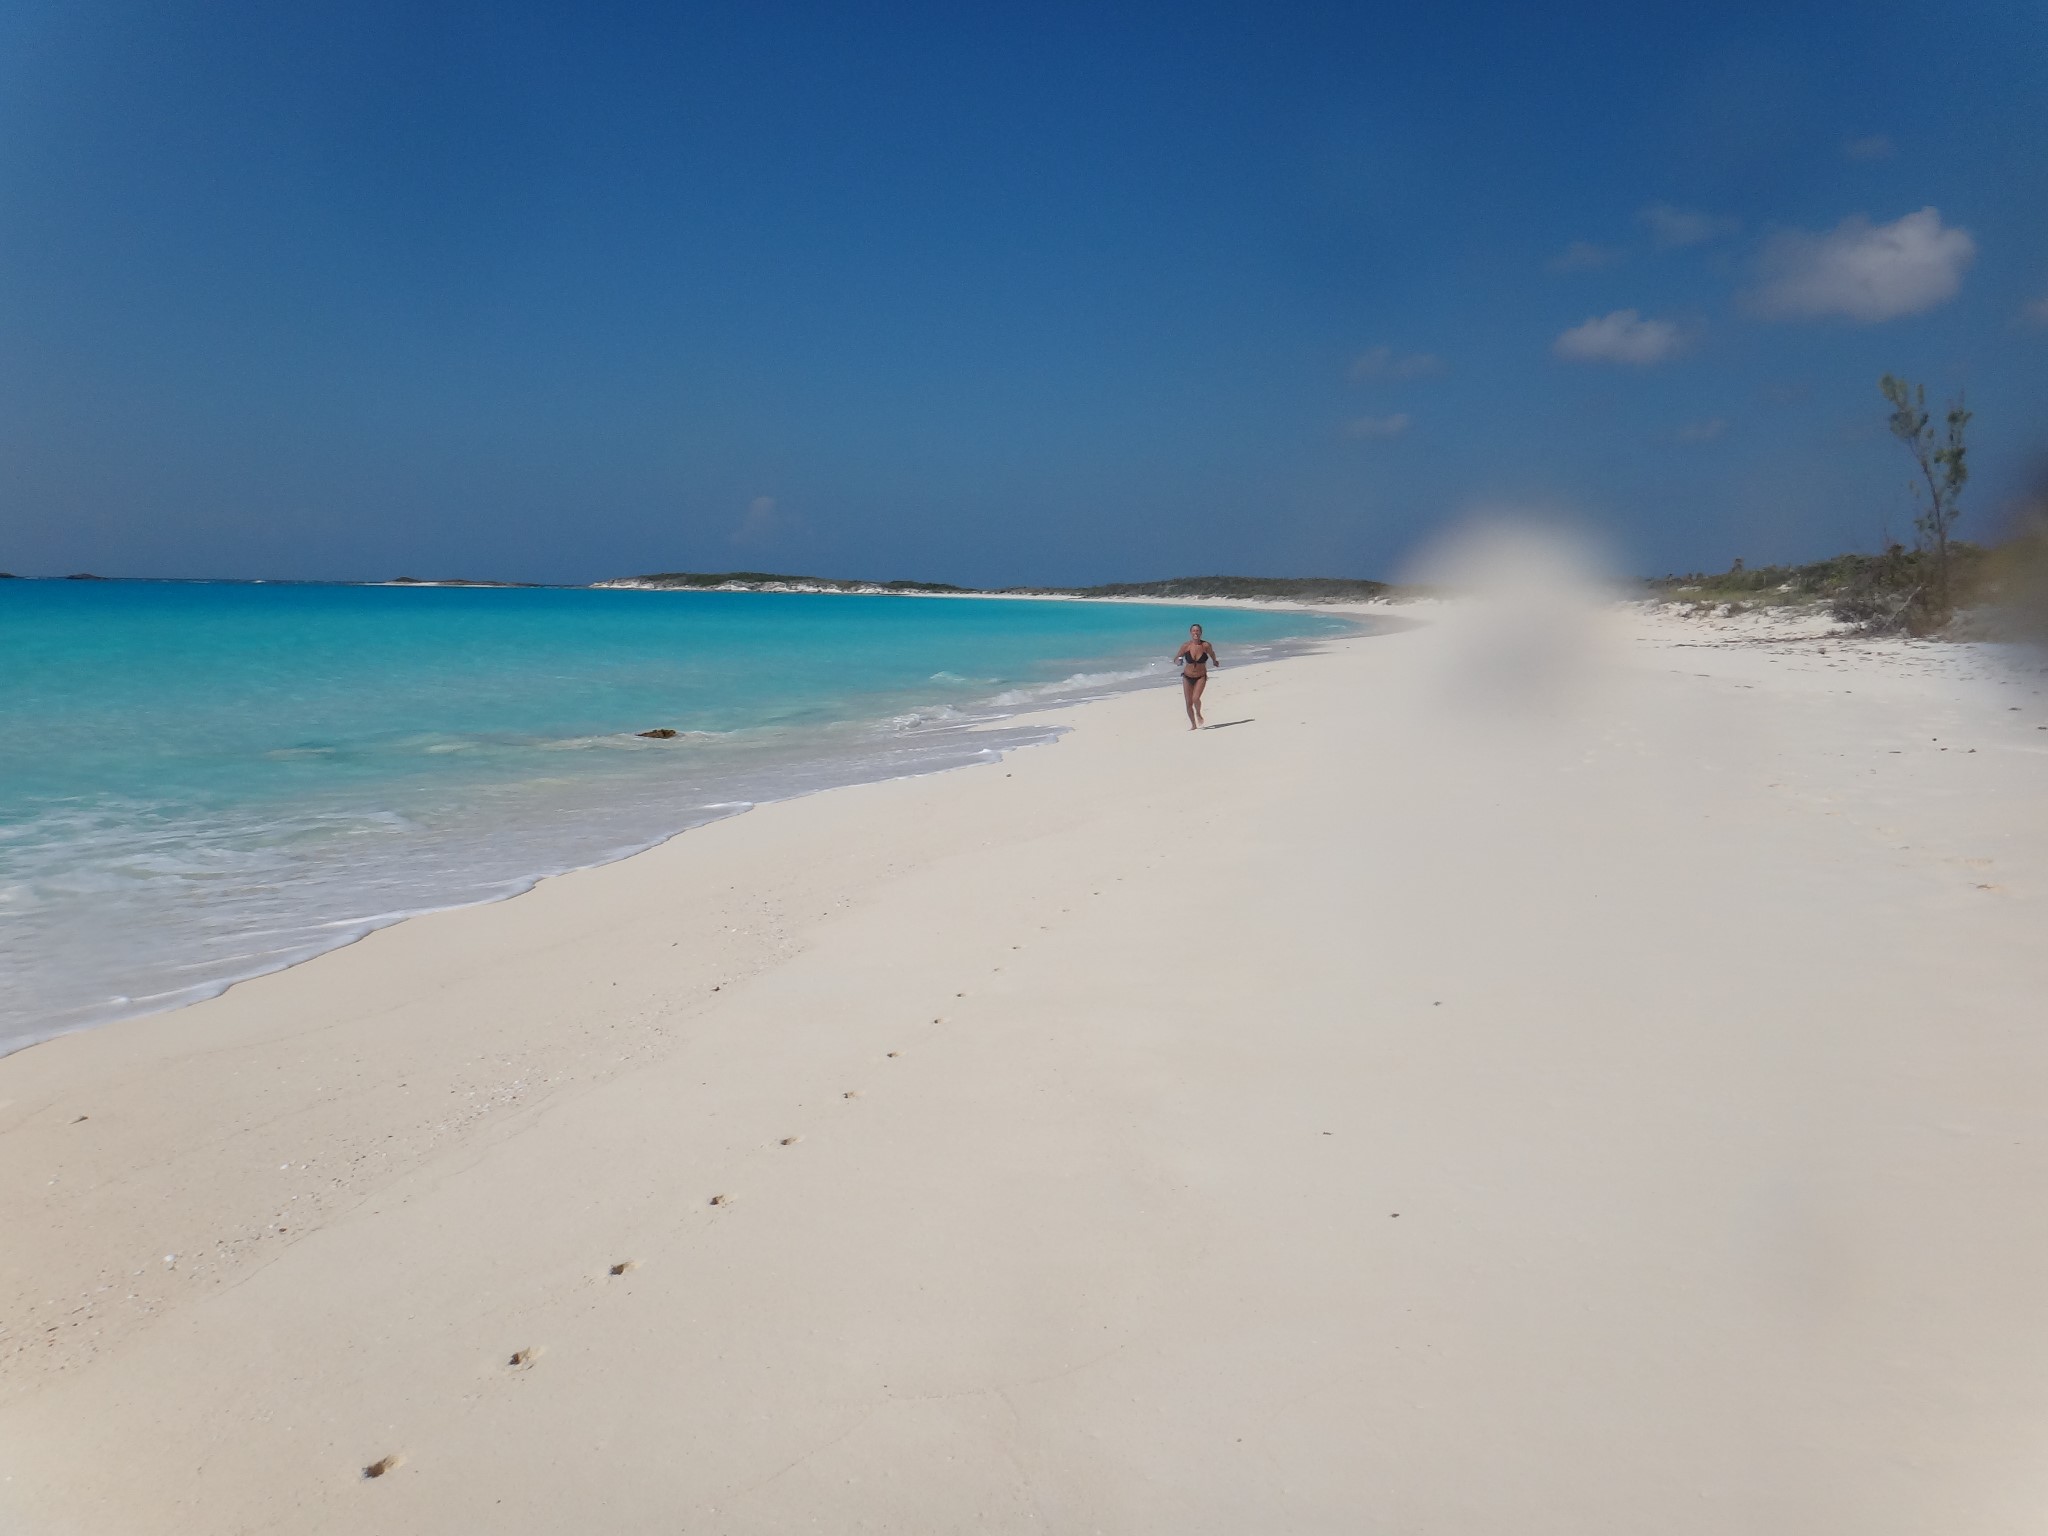 ANEGADA BVI ONE OF THE LONGEST BEACHES I HAVE EVER SEEN!